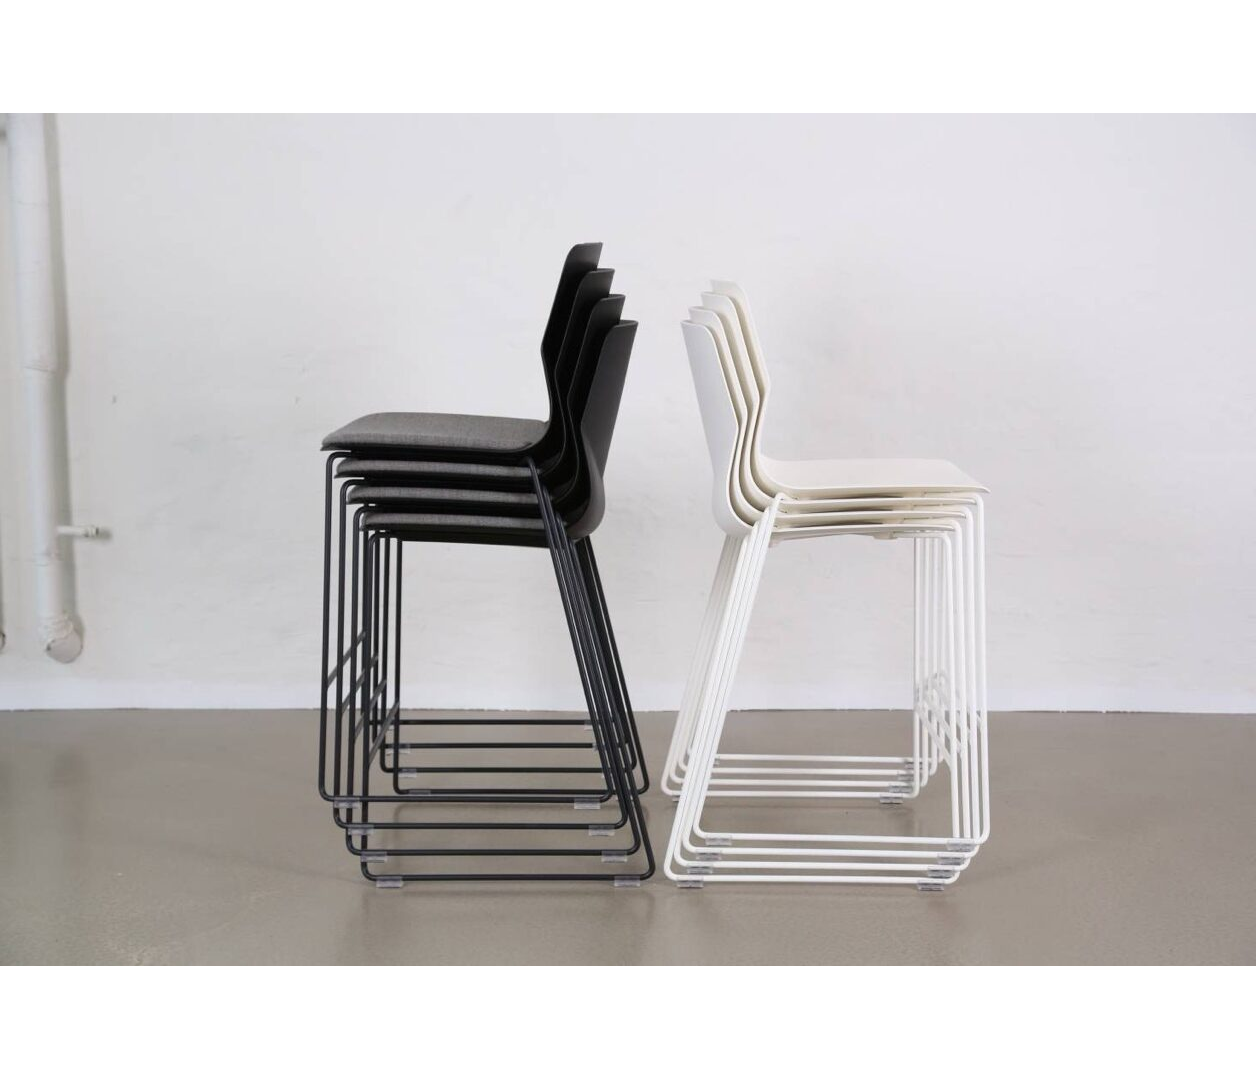 OCEE&FOUR – Chairs – FourSure 105 – Details Image 2 Large